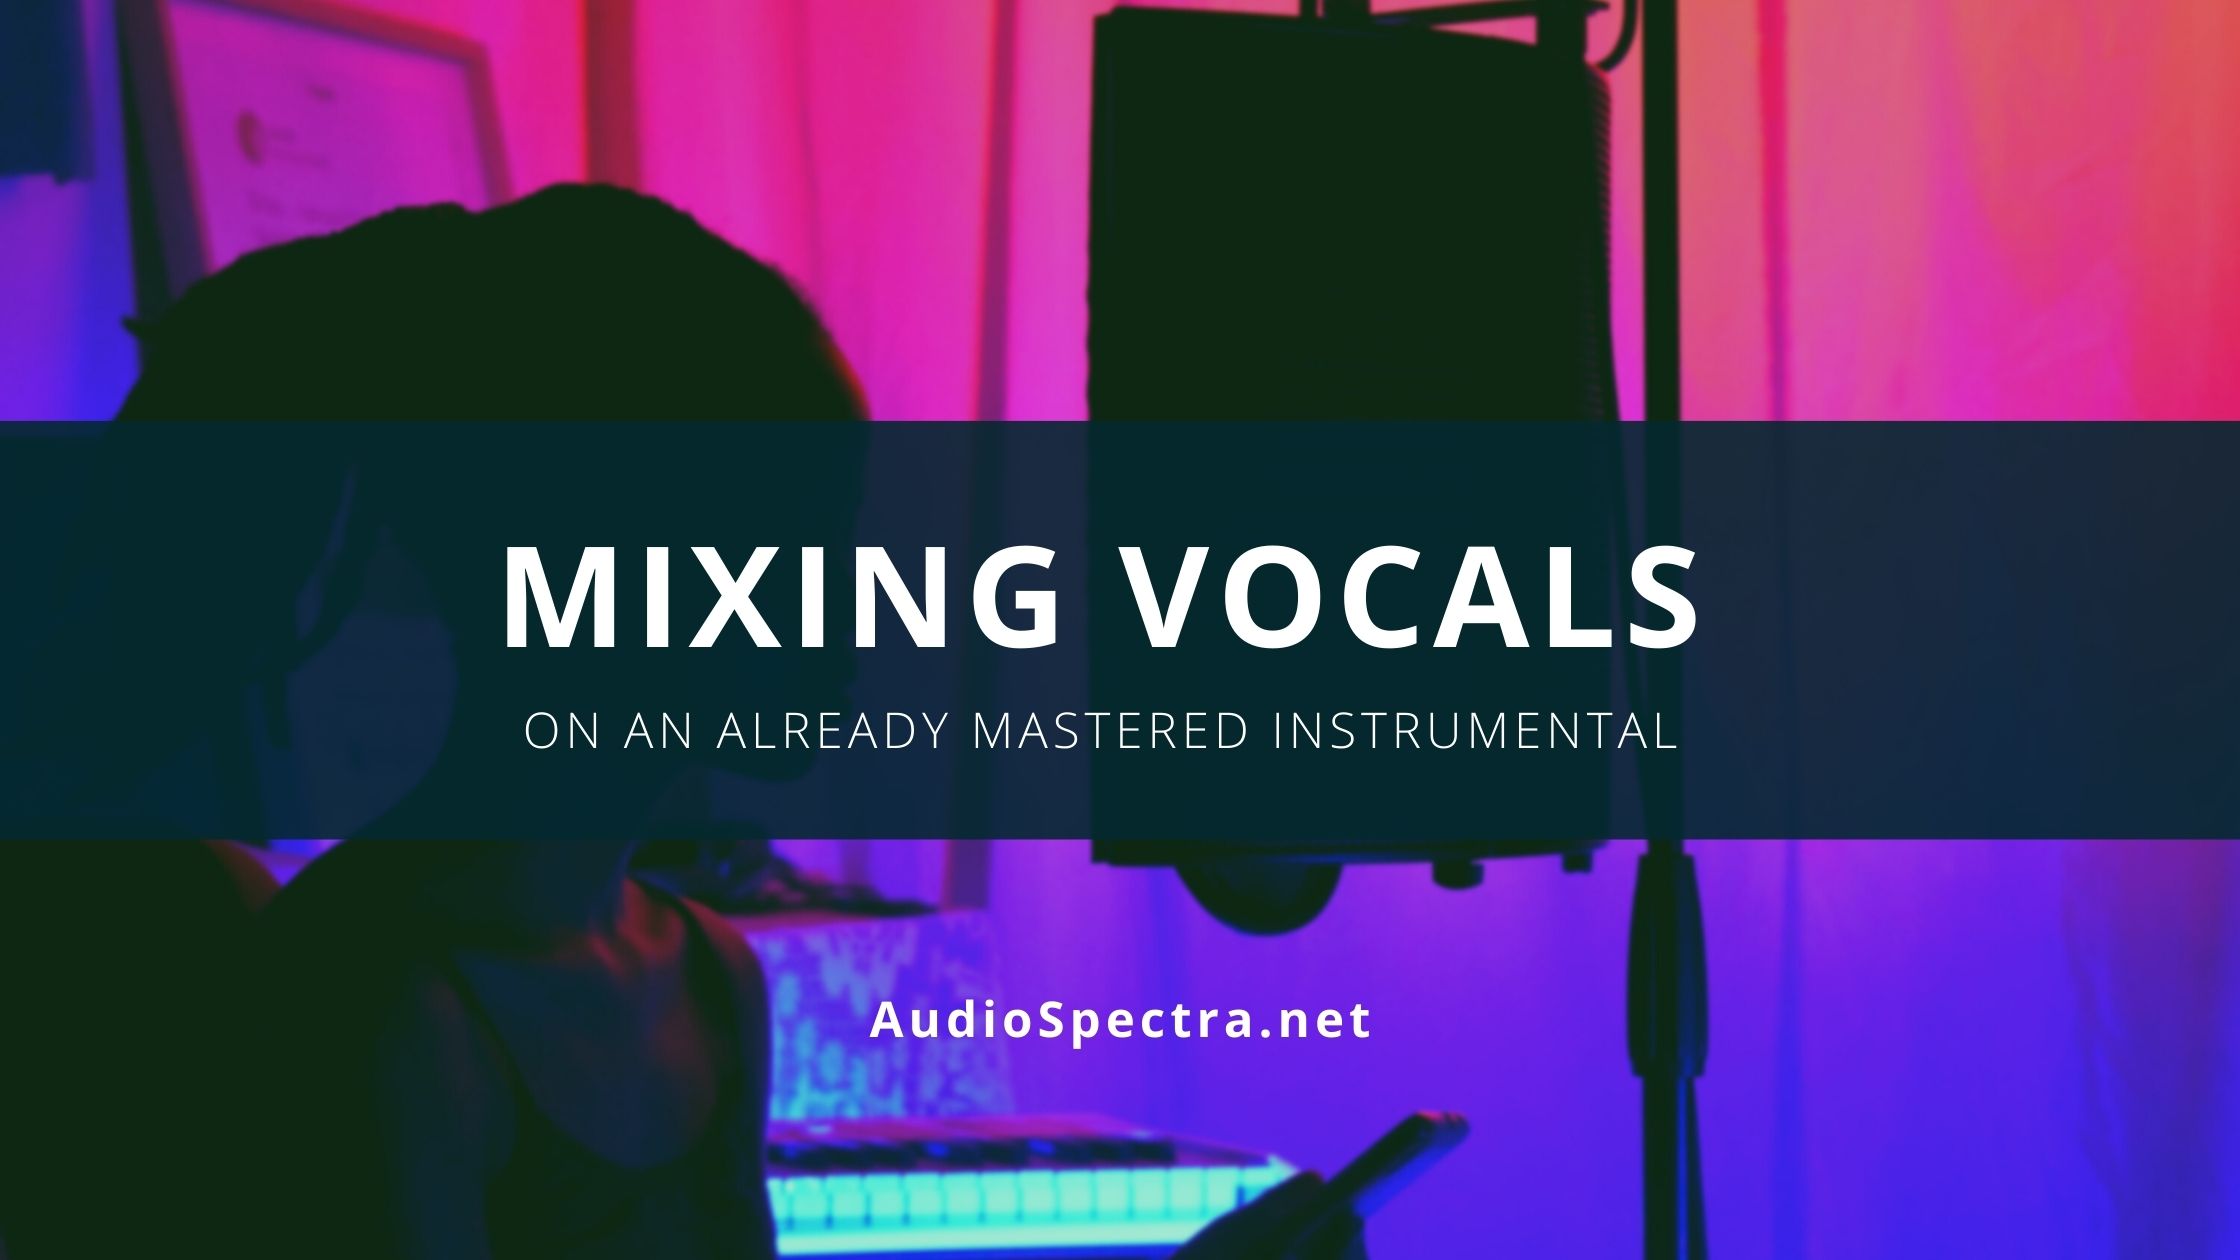 Mixing Vocals On An Already Mastered Instrumental